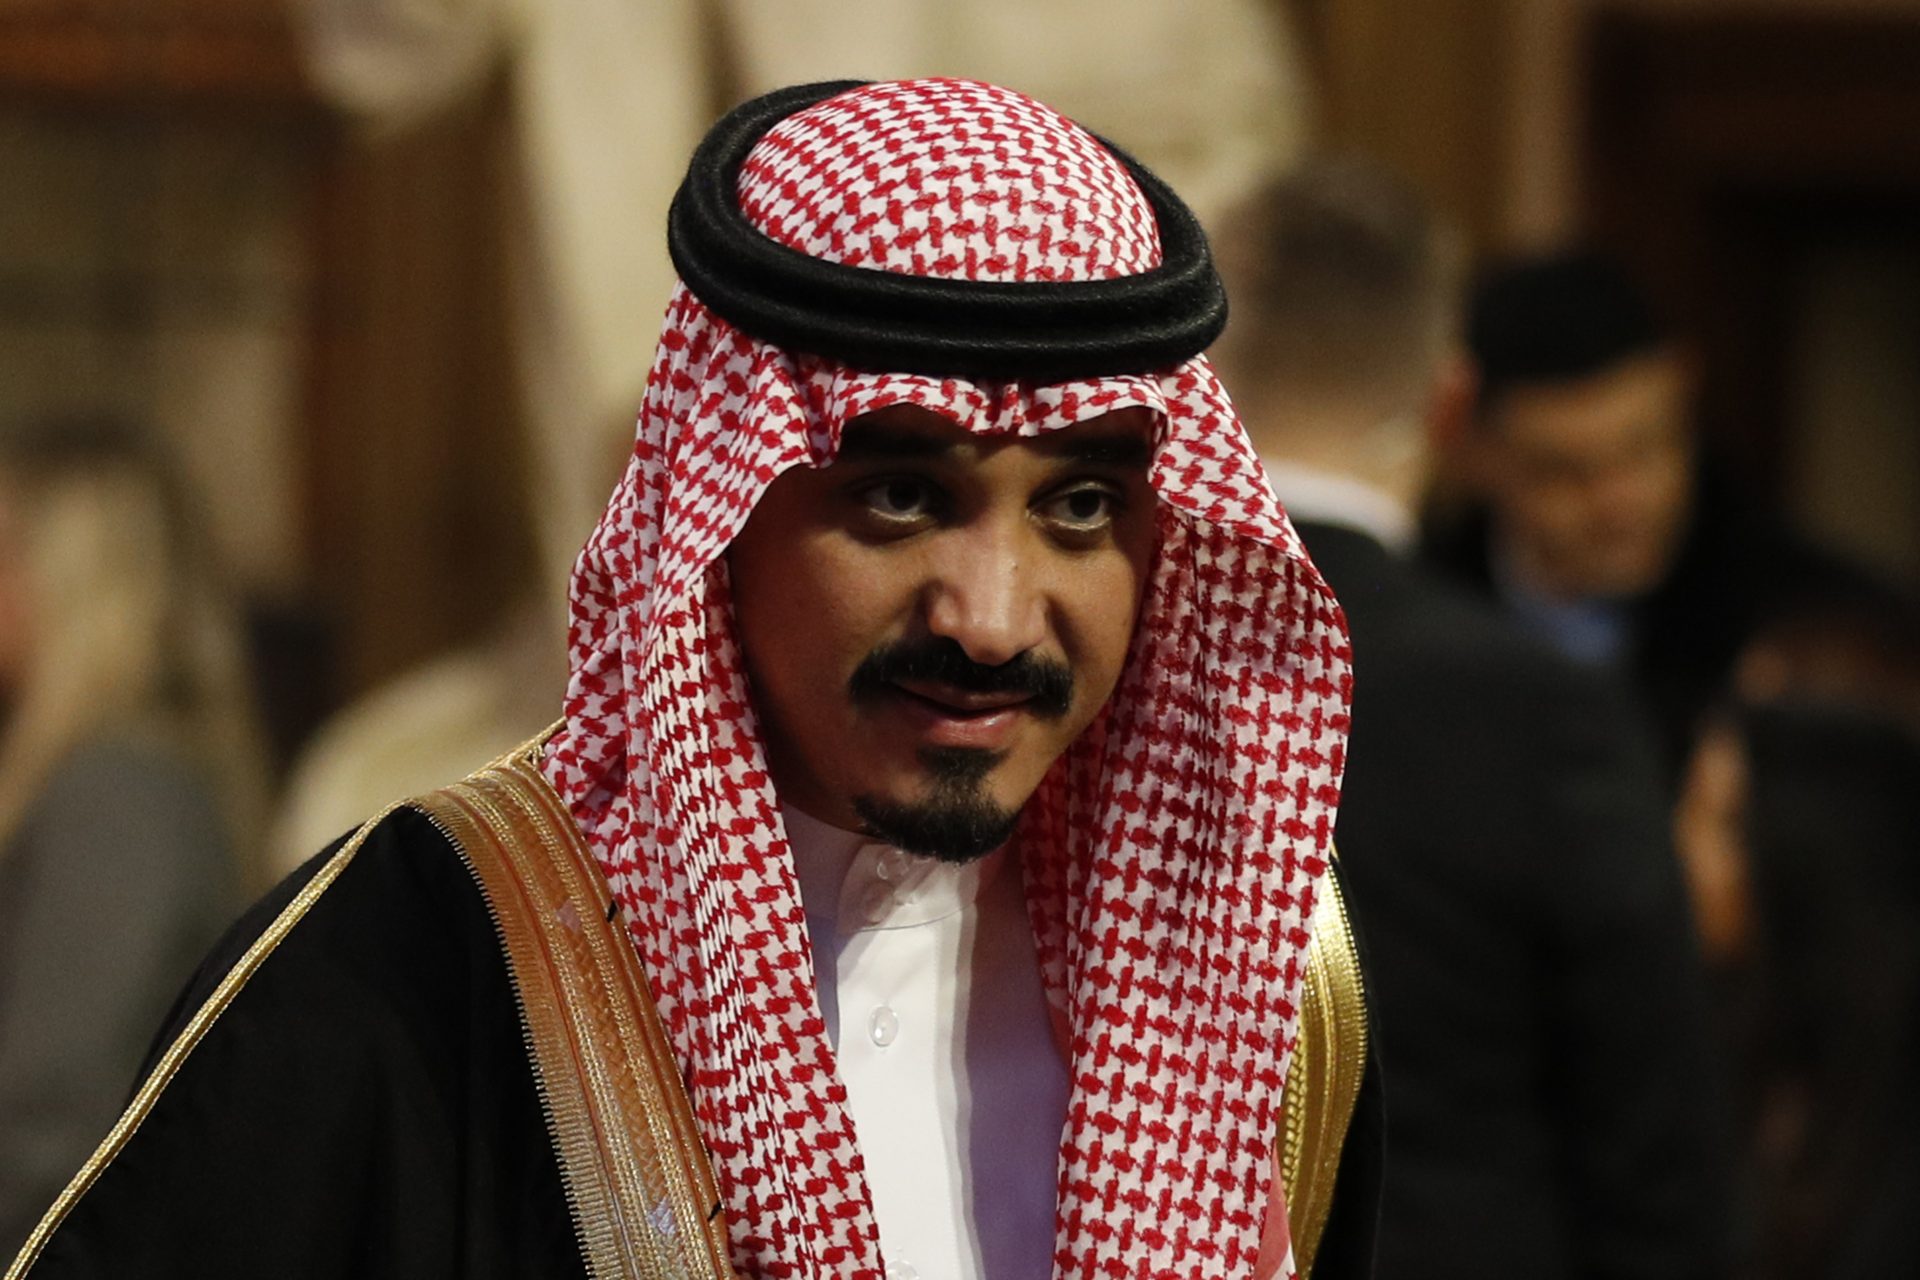 Saudi Ambassdor to the UK Khalid bin Bandar bin Sultan al-Saud walks through the Central Lobbey as he attends the State Opening of Parliament. (Photo by Adrian Dennis - WPA Pool/Getty Images)